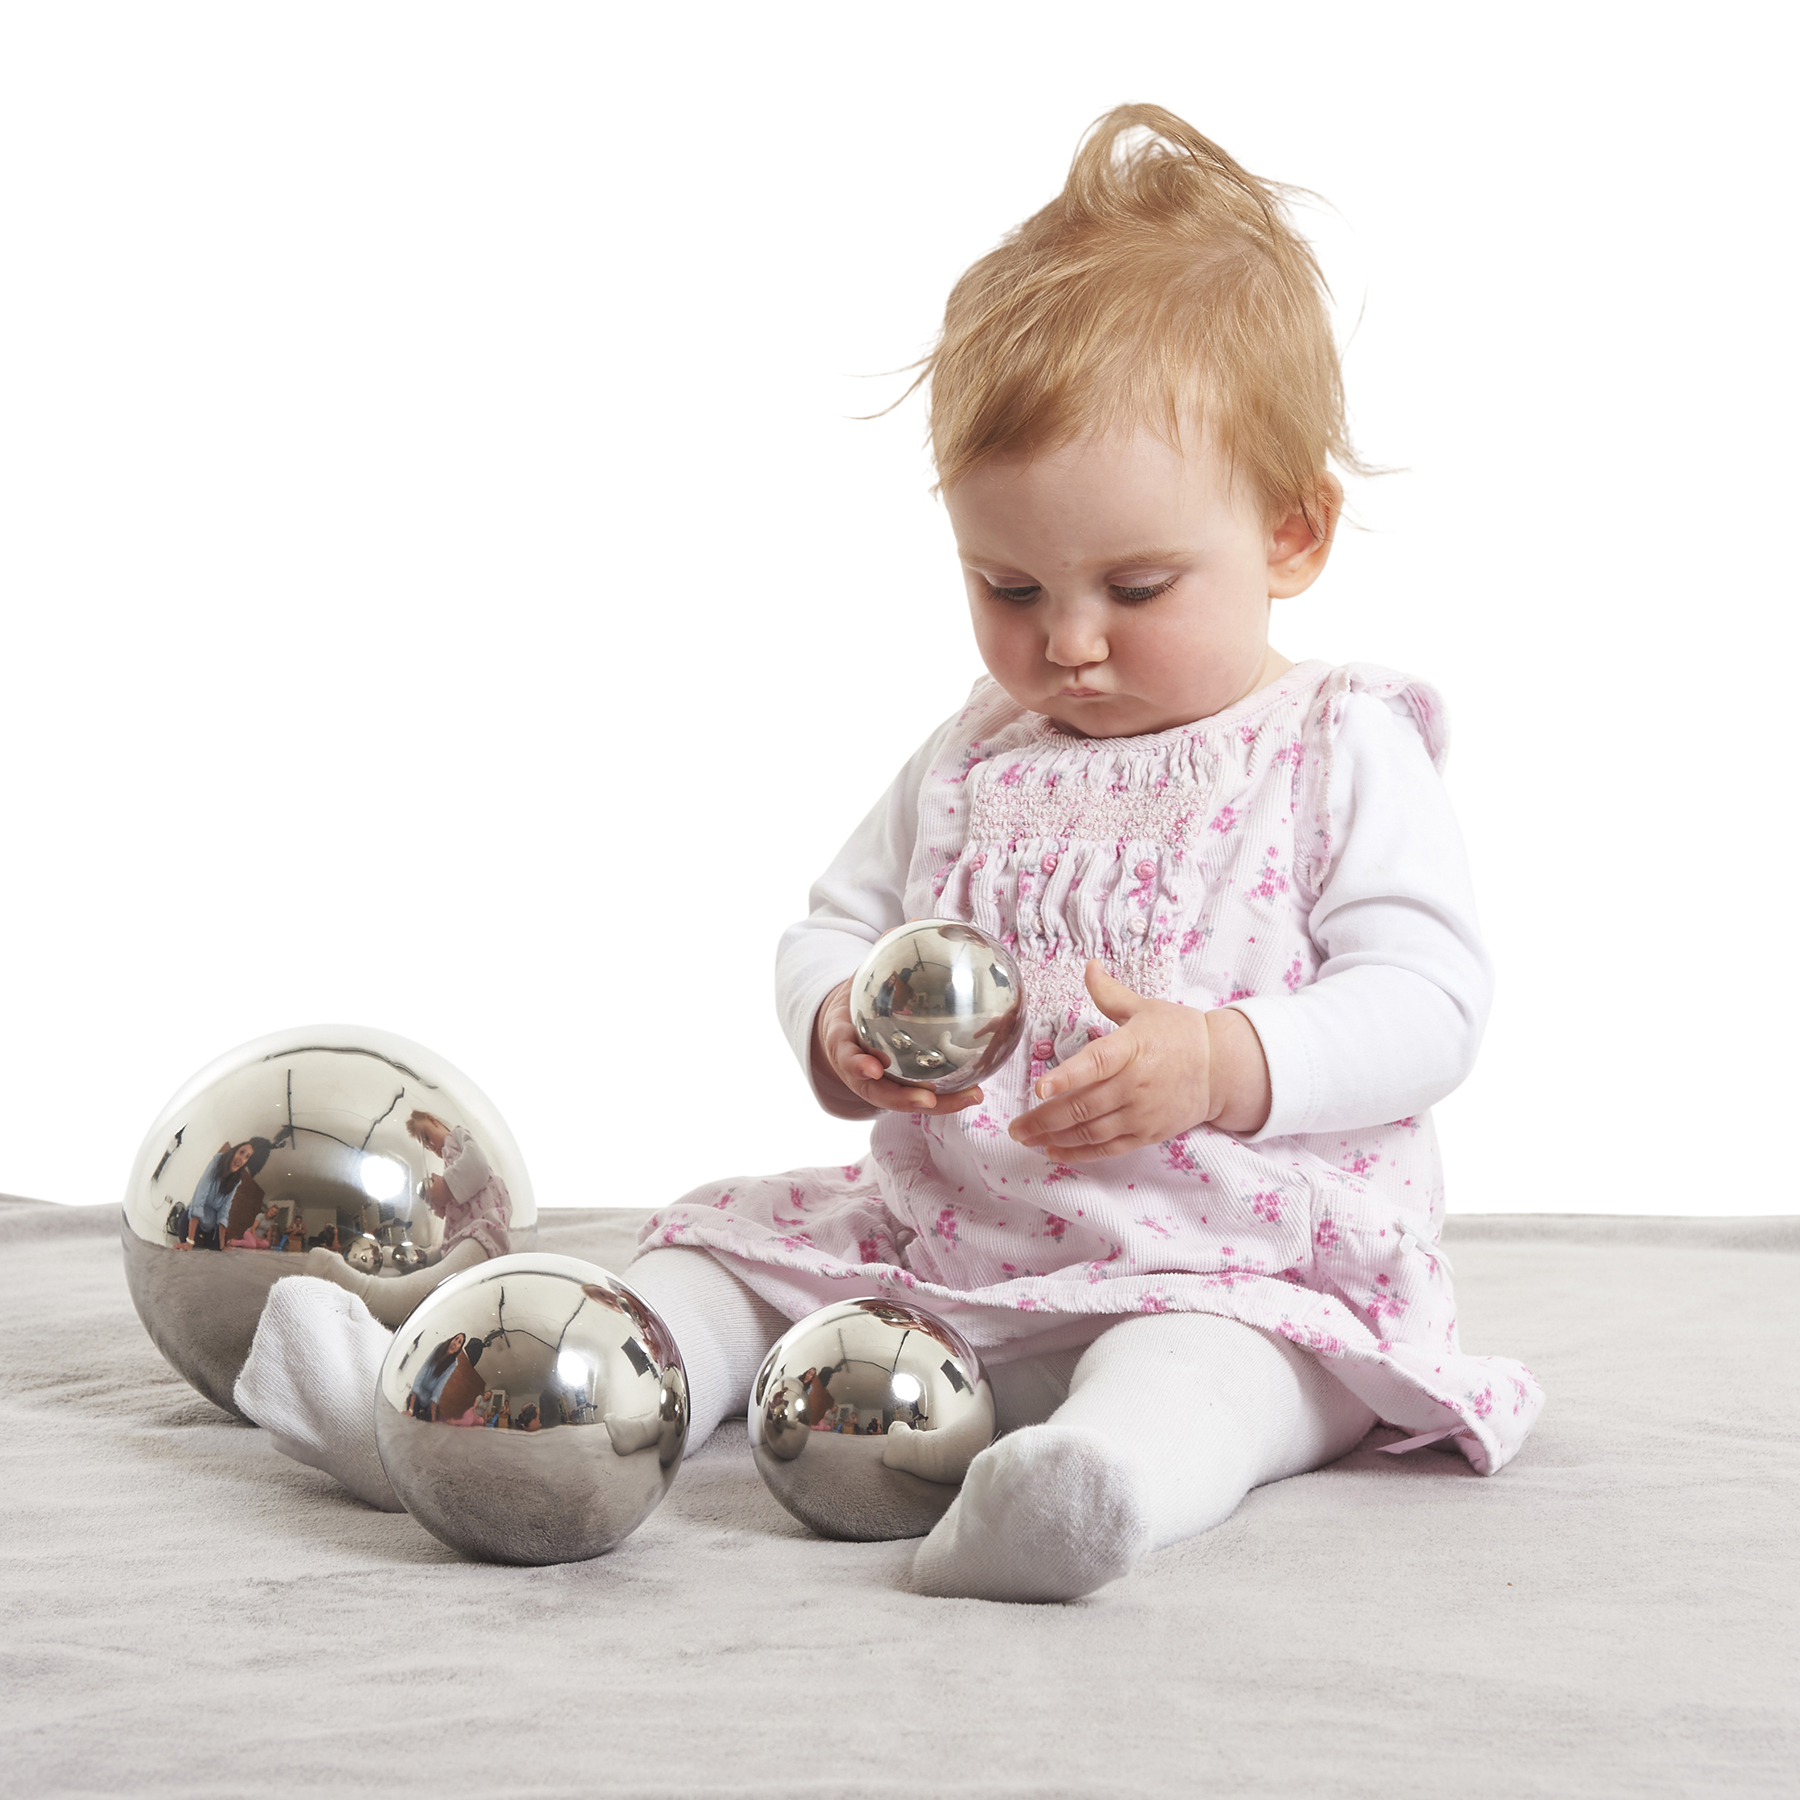 TickiT Sensory Reflective Balls - Silver - Set of 4 image number null